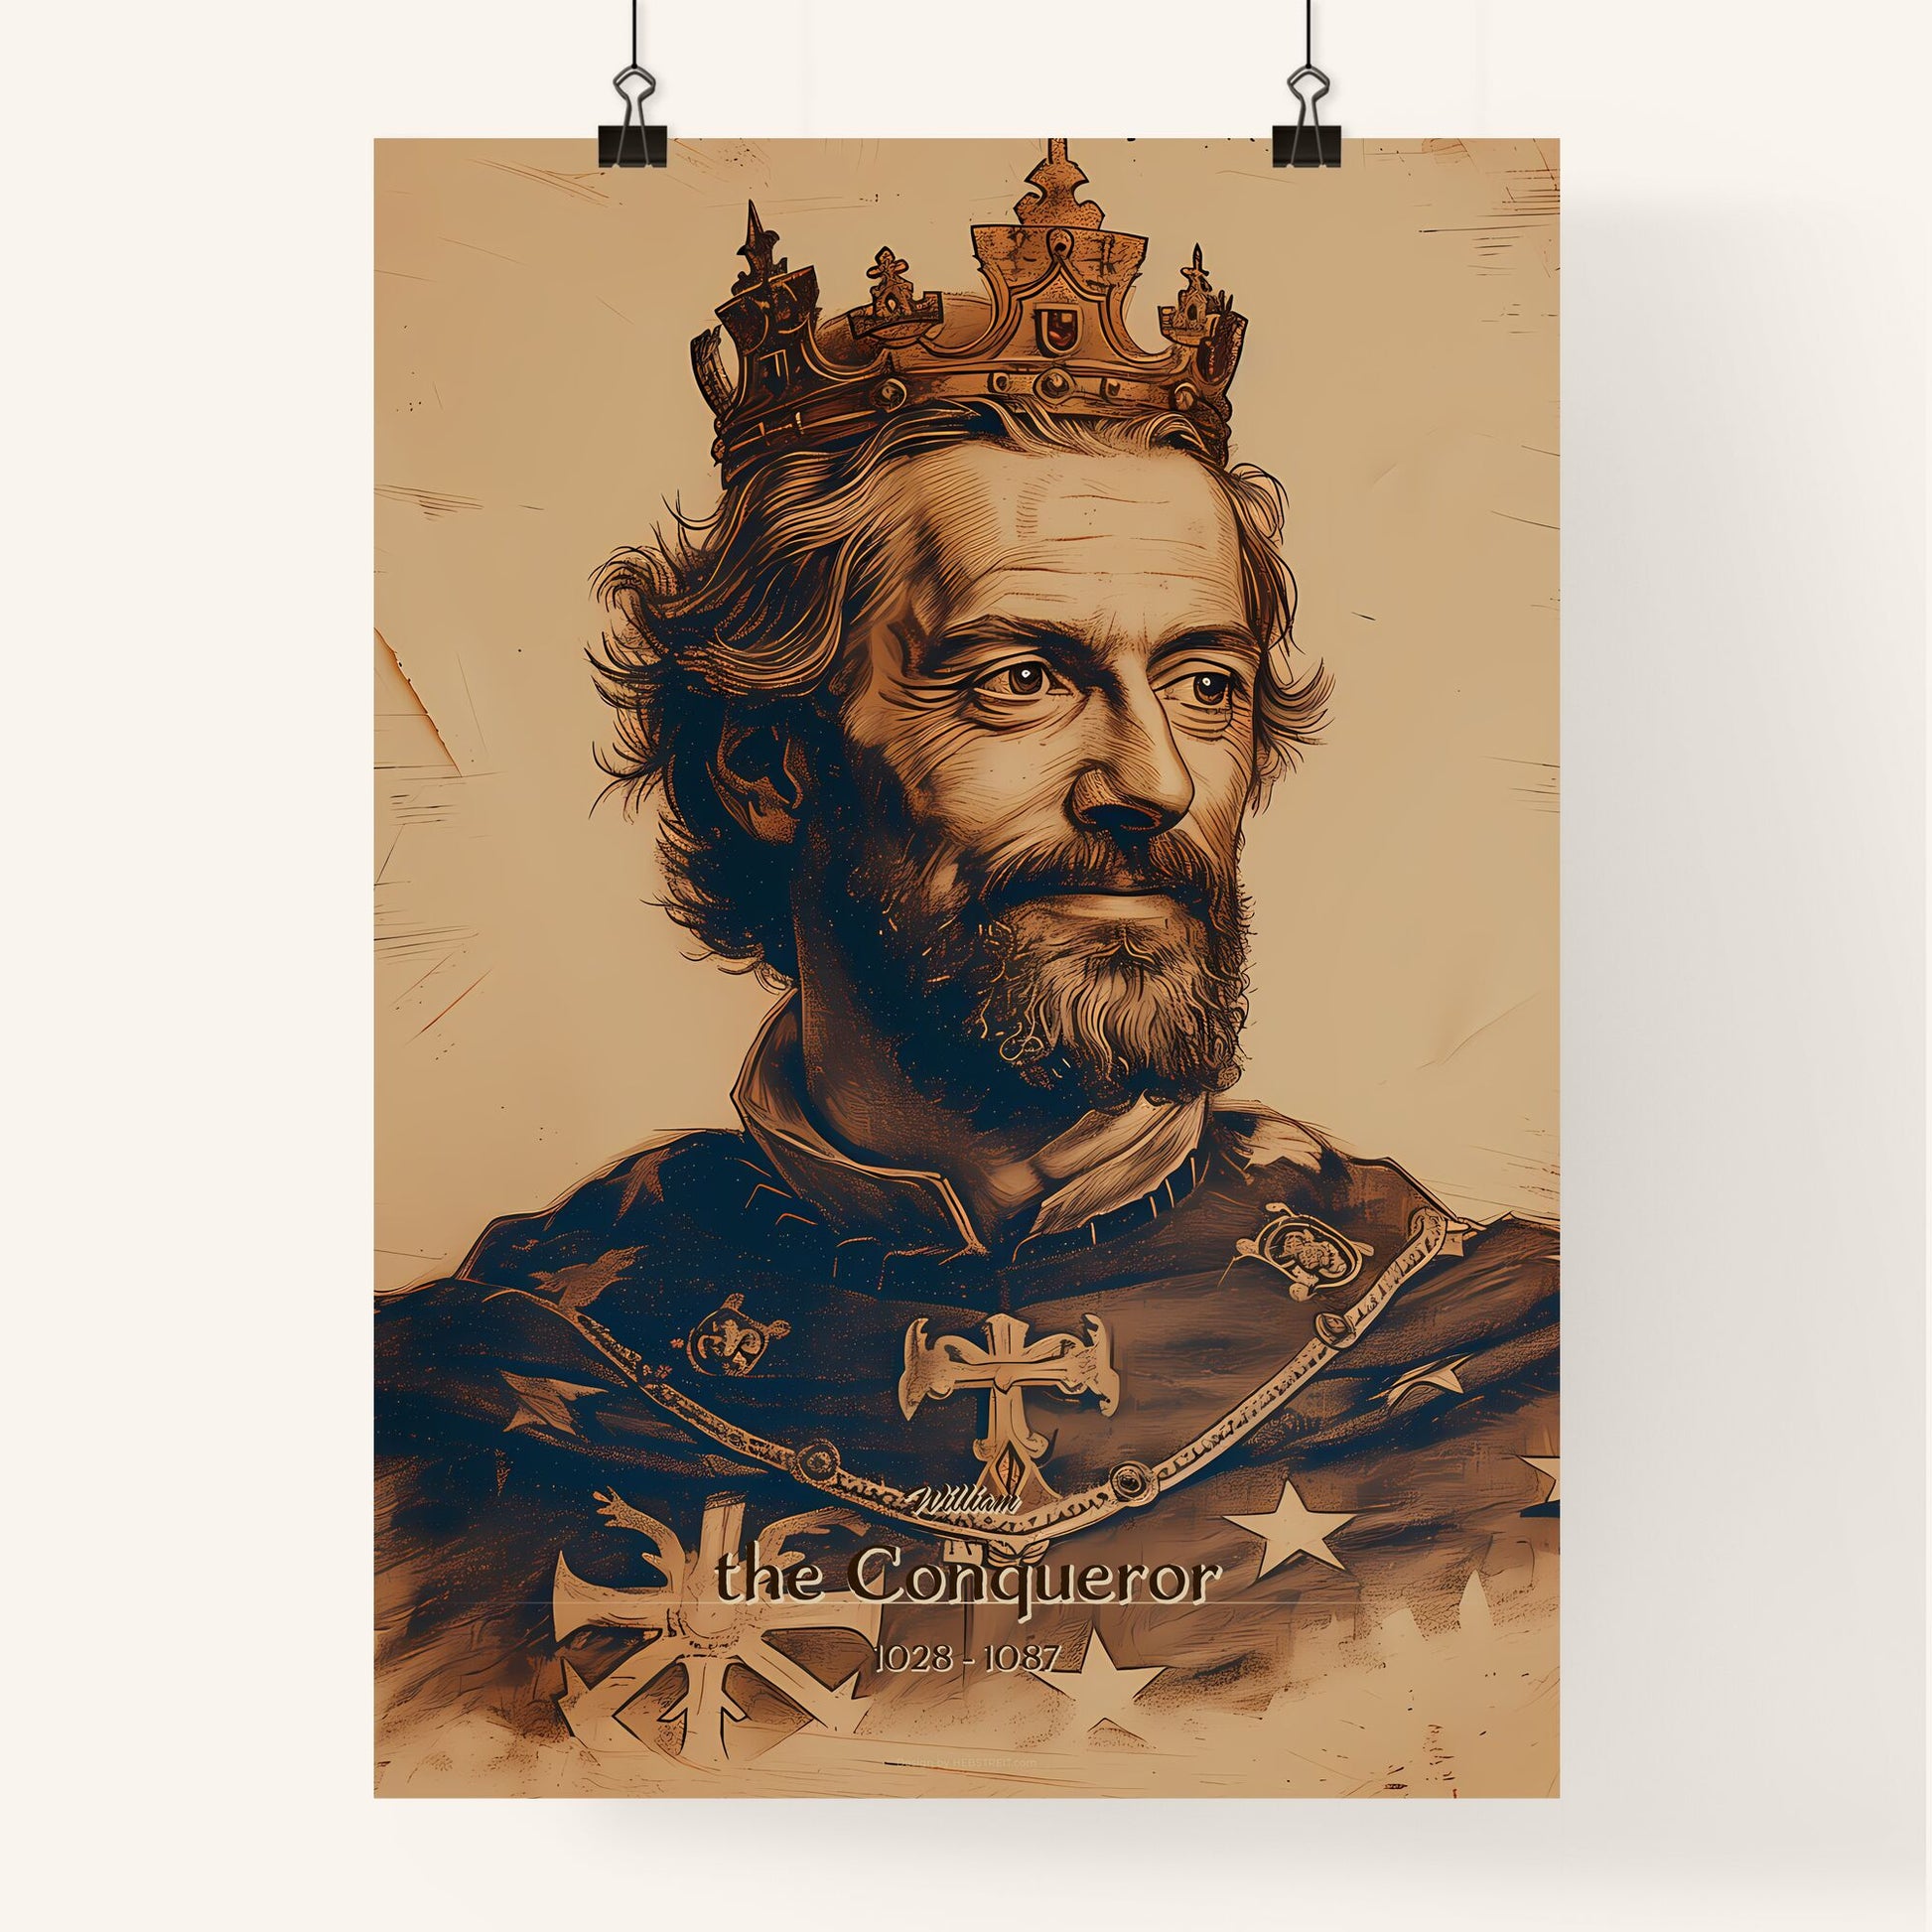 William, the Conqueror, 1028 - 1087, A Poster of a man wearing a crown Default Title